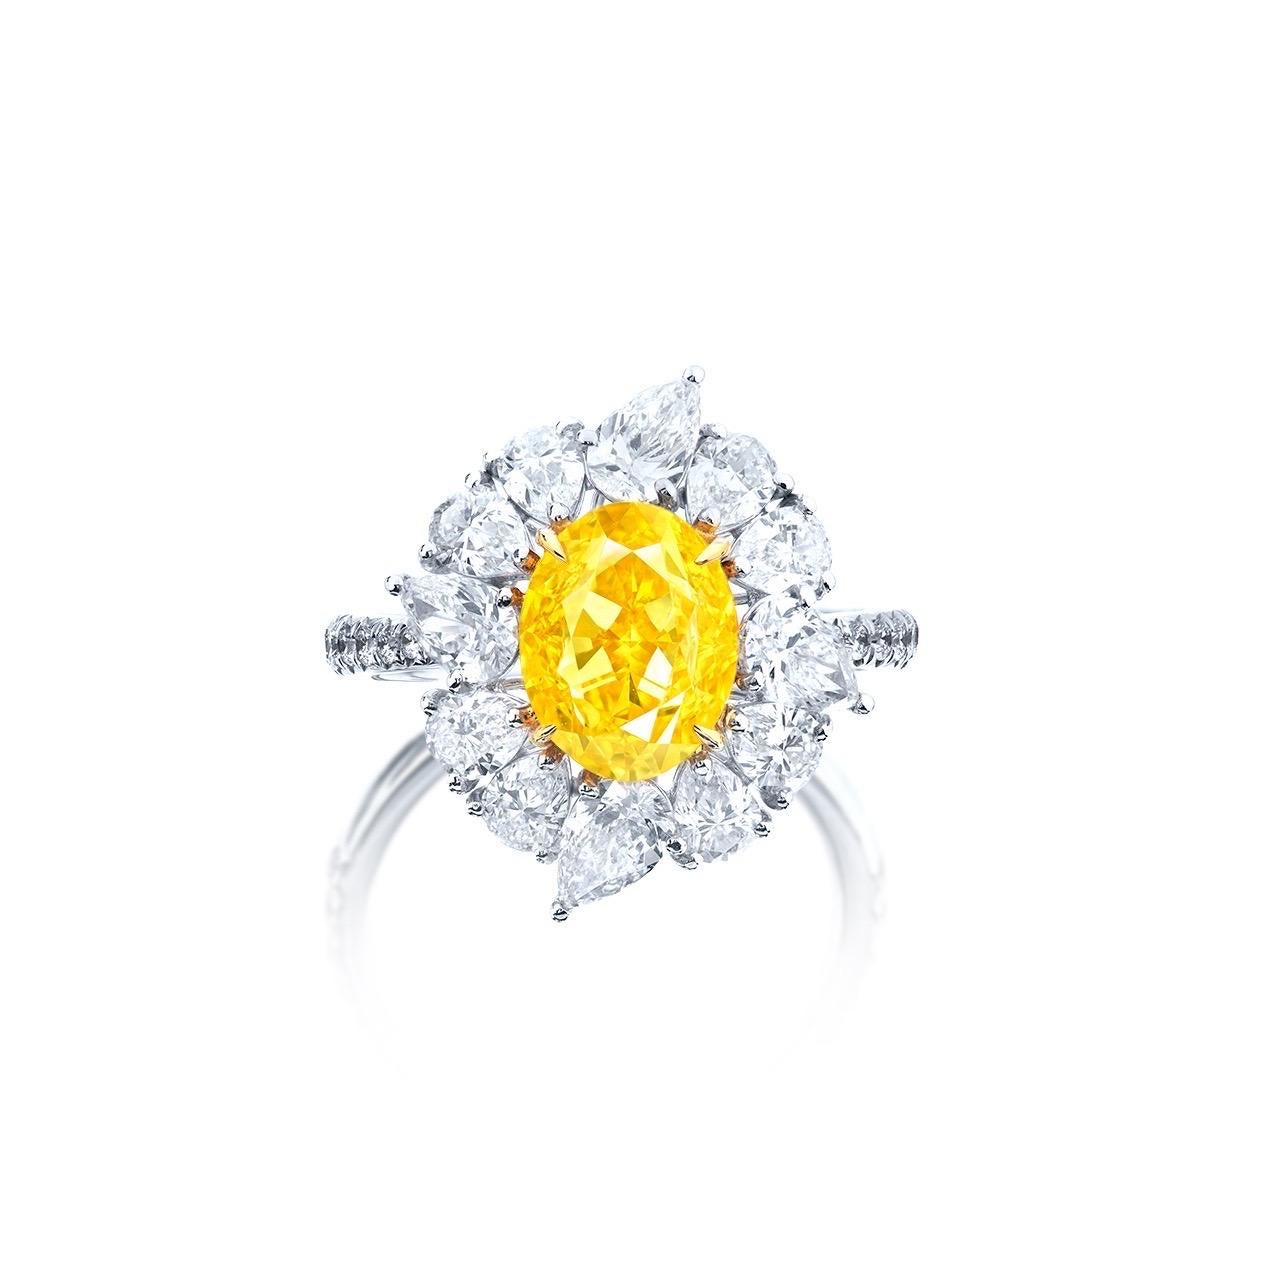 Emilio Jewelry Gia Certified 3.00Carat Flawless Vivid Oval Yellow Diamond In New Condition For Sale In New York, NY